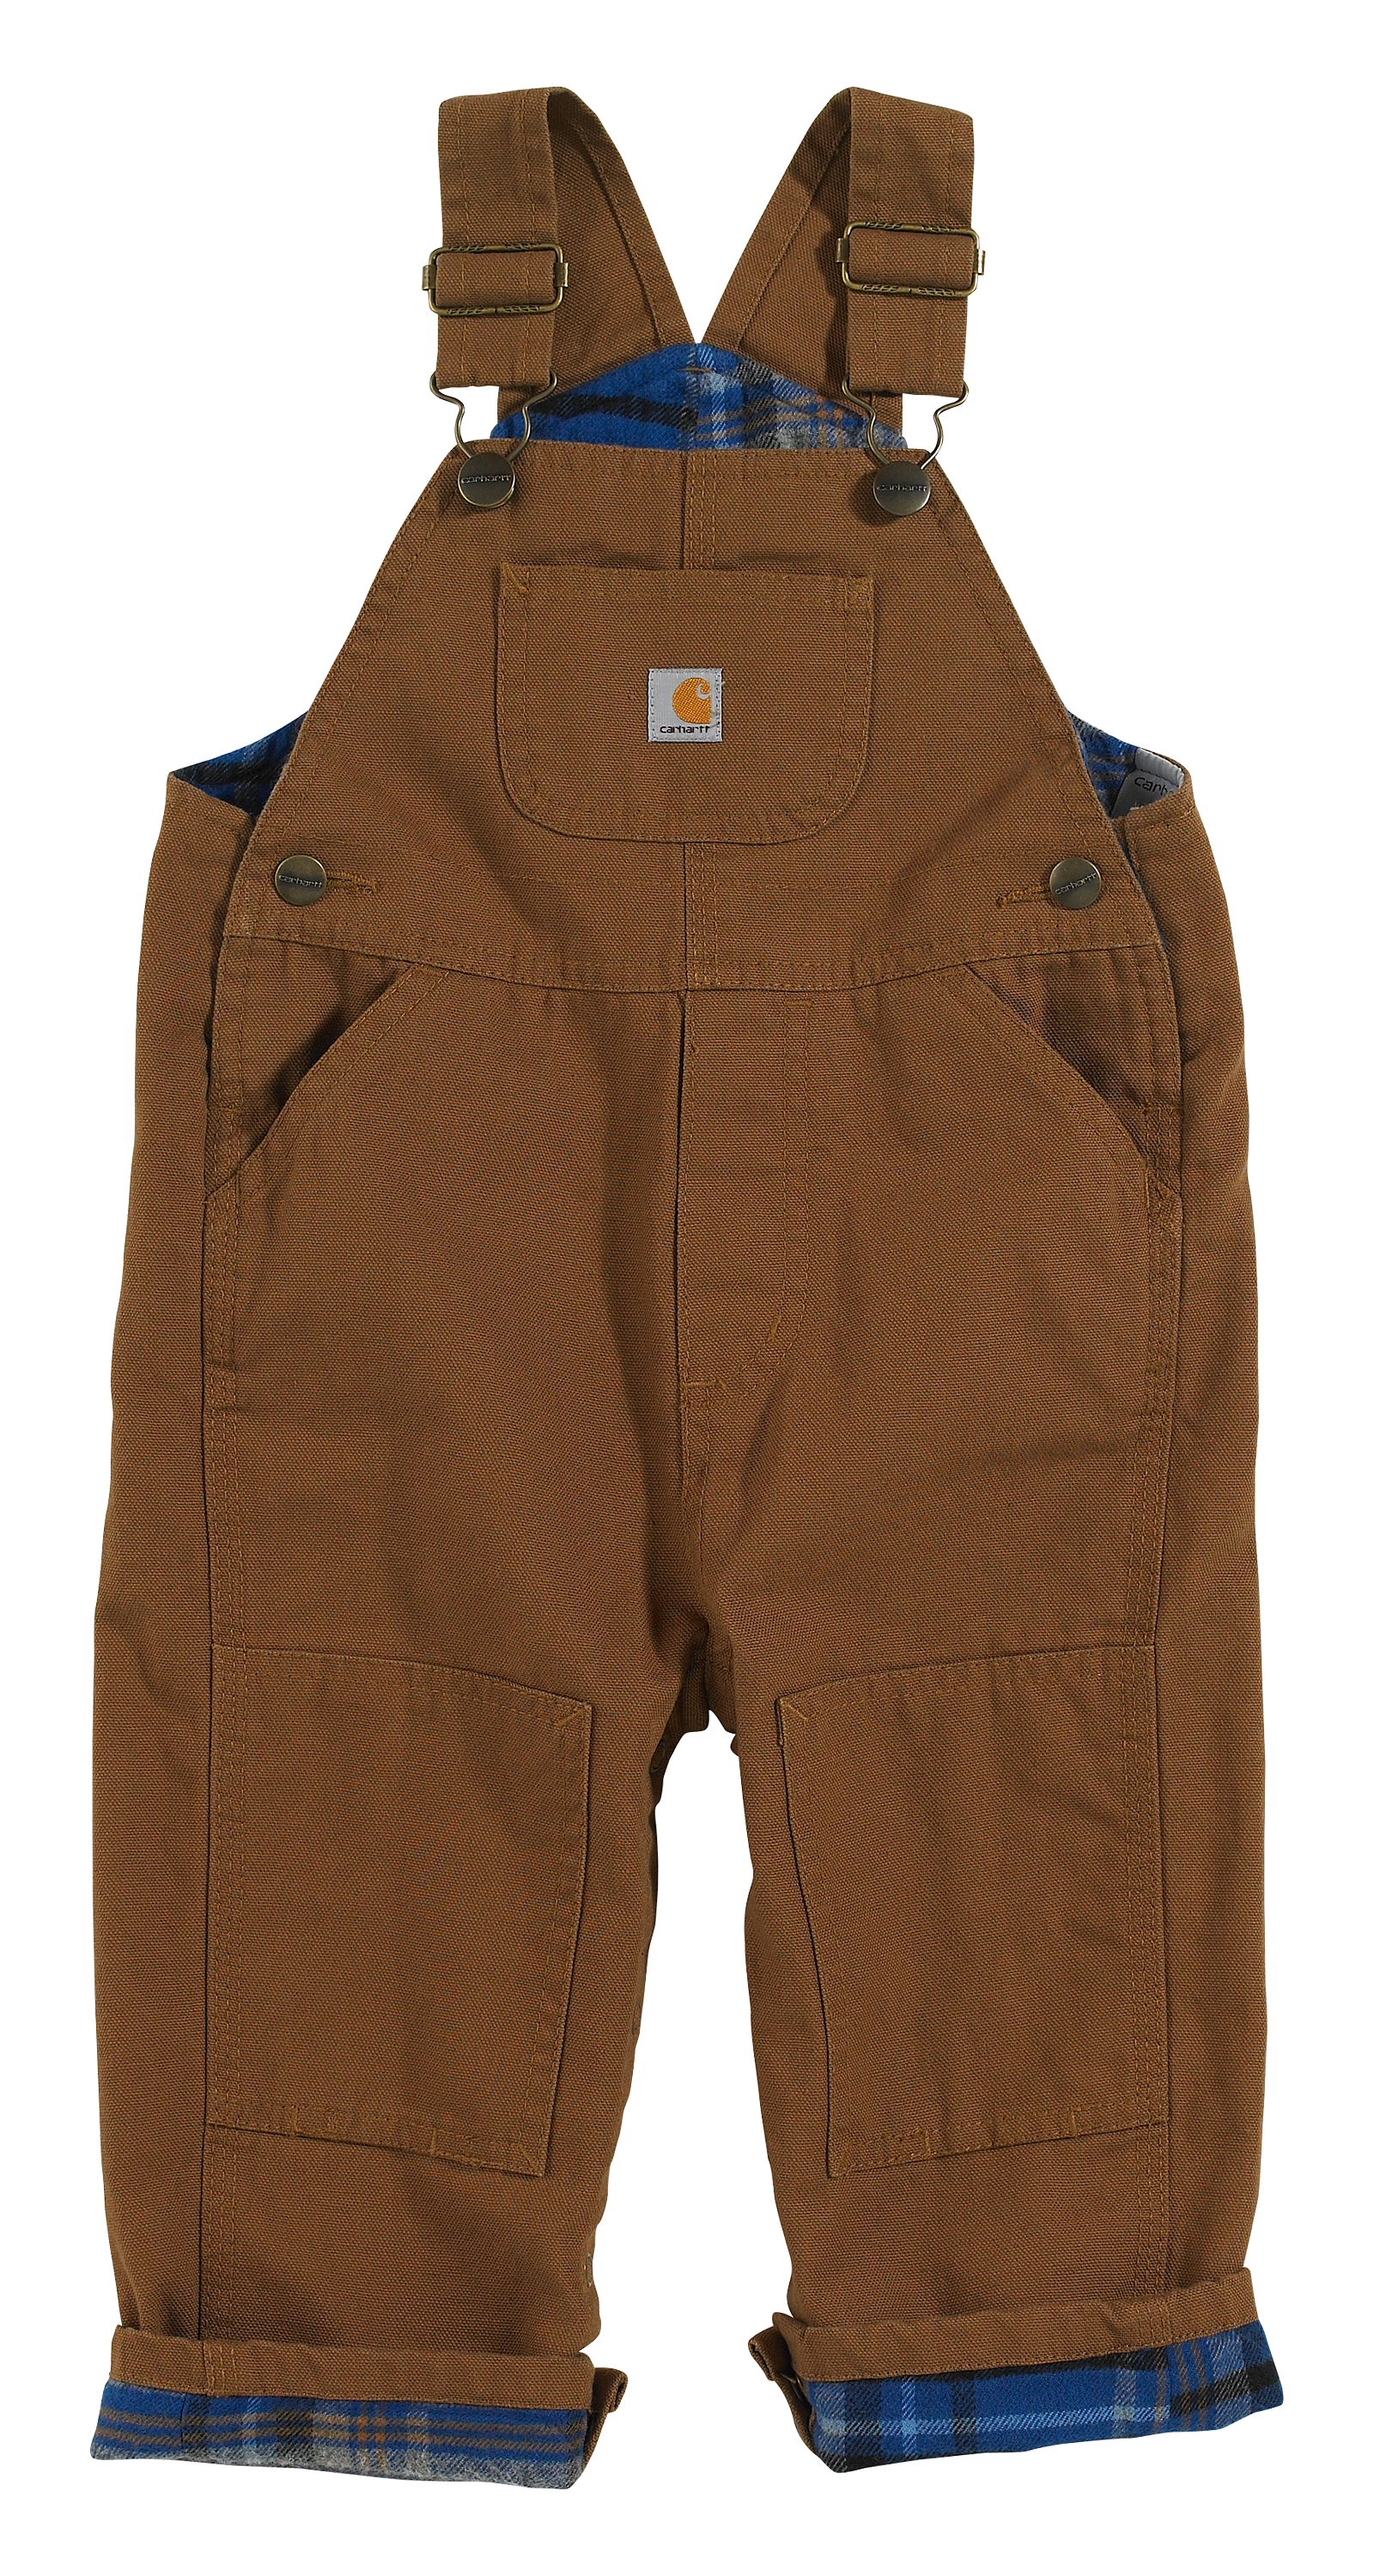 Carhartt® Infants'/Toddlers' Canvas Bib Overall